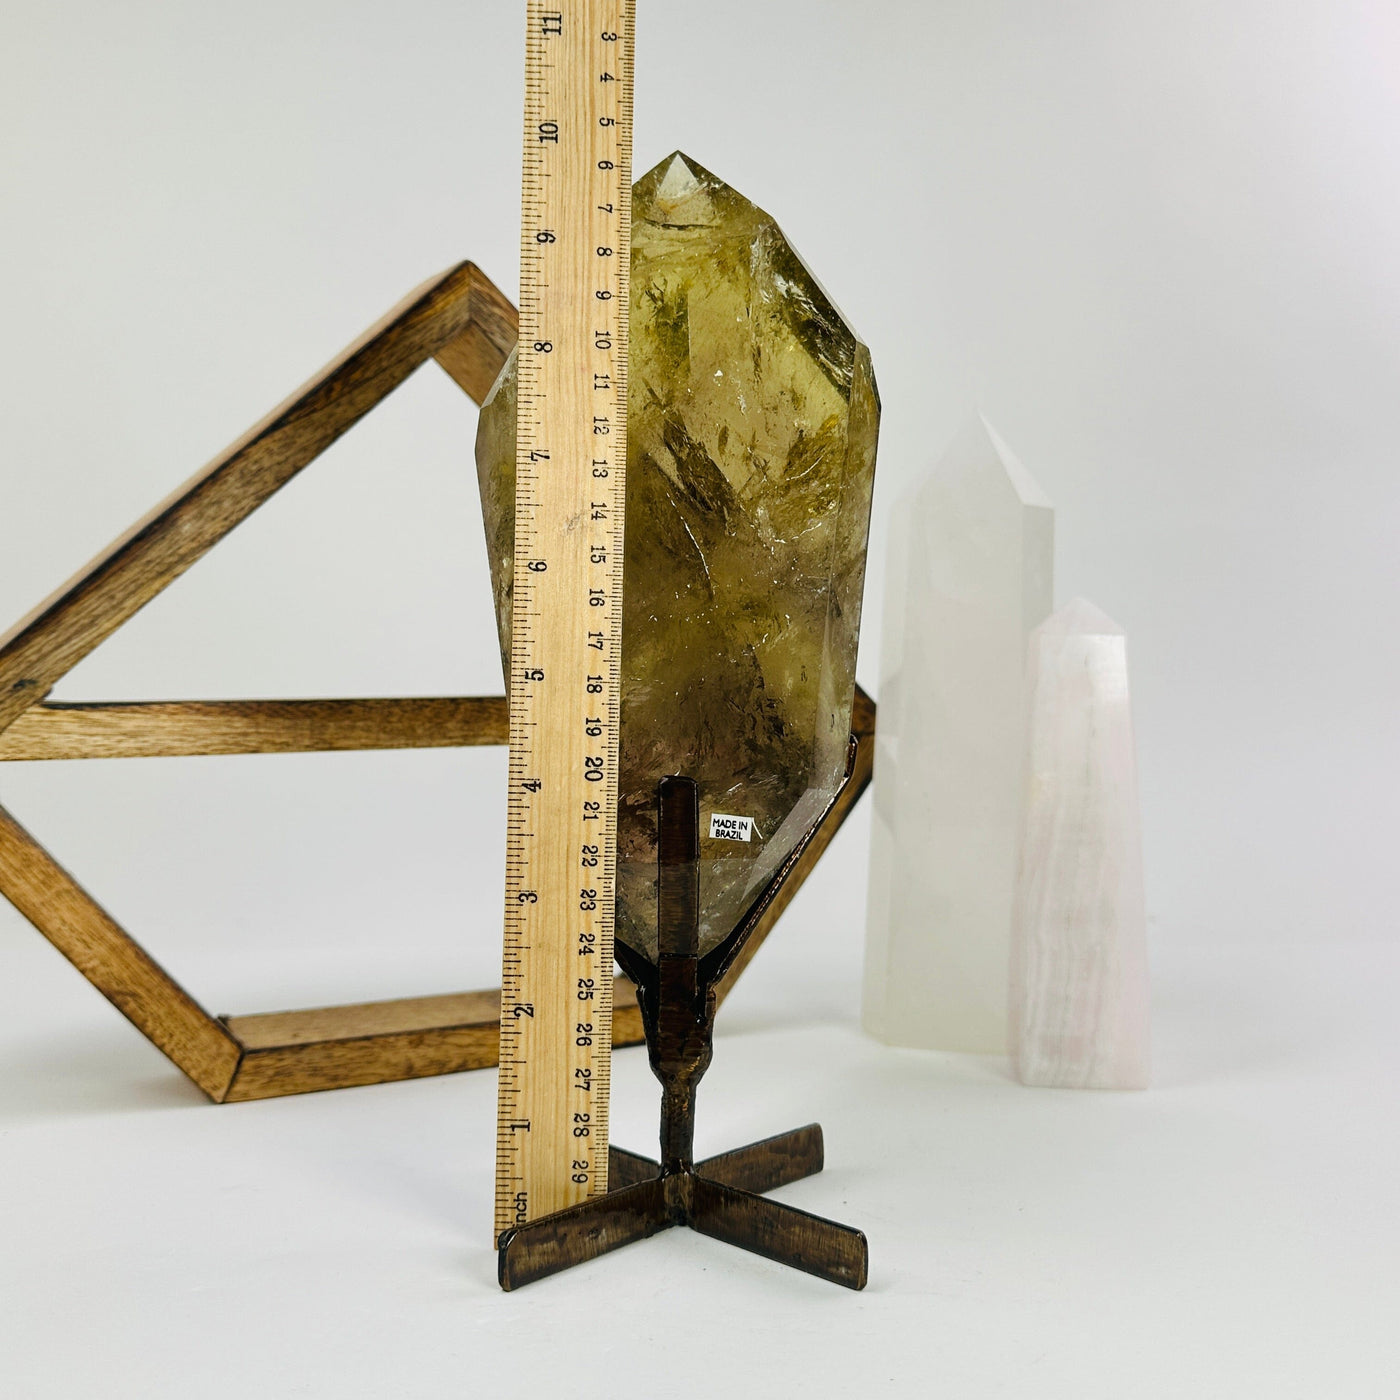 citrine on metal stand next to a ruler for size reference